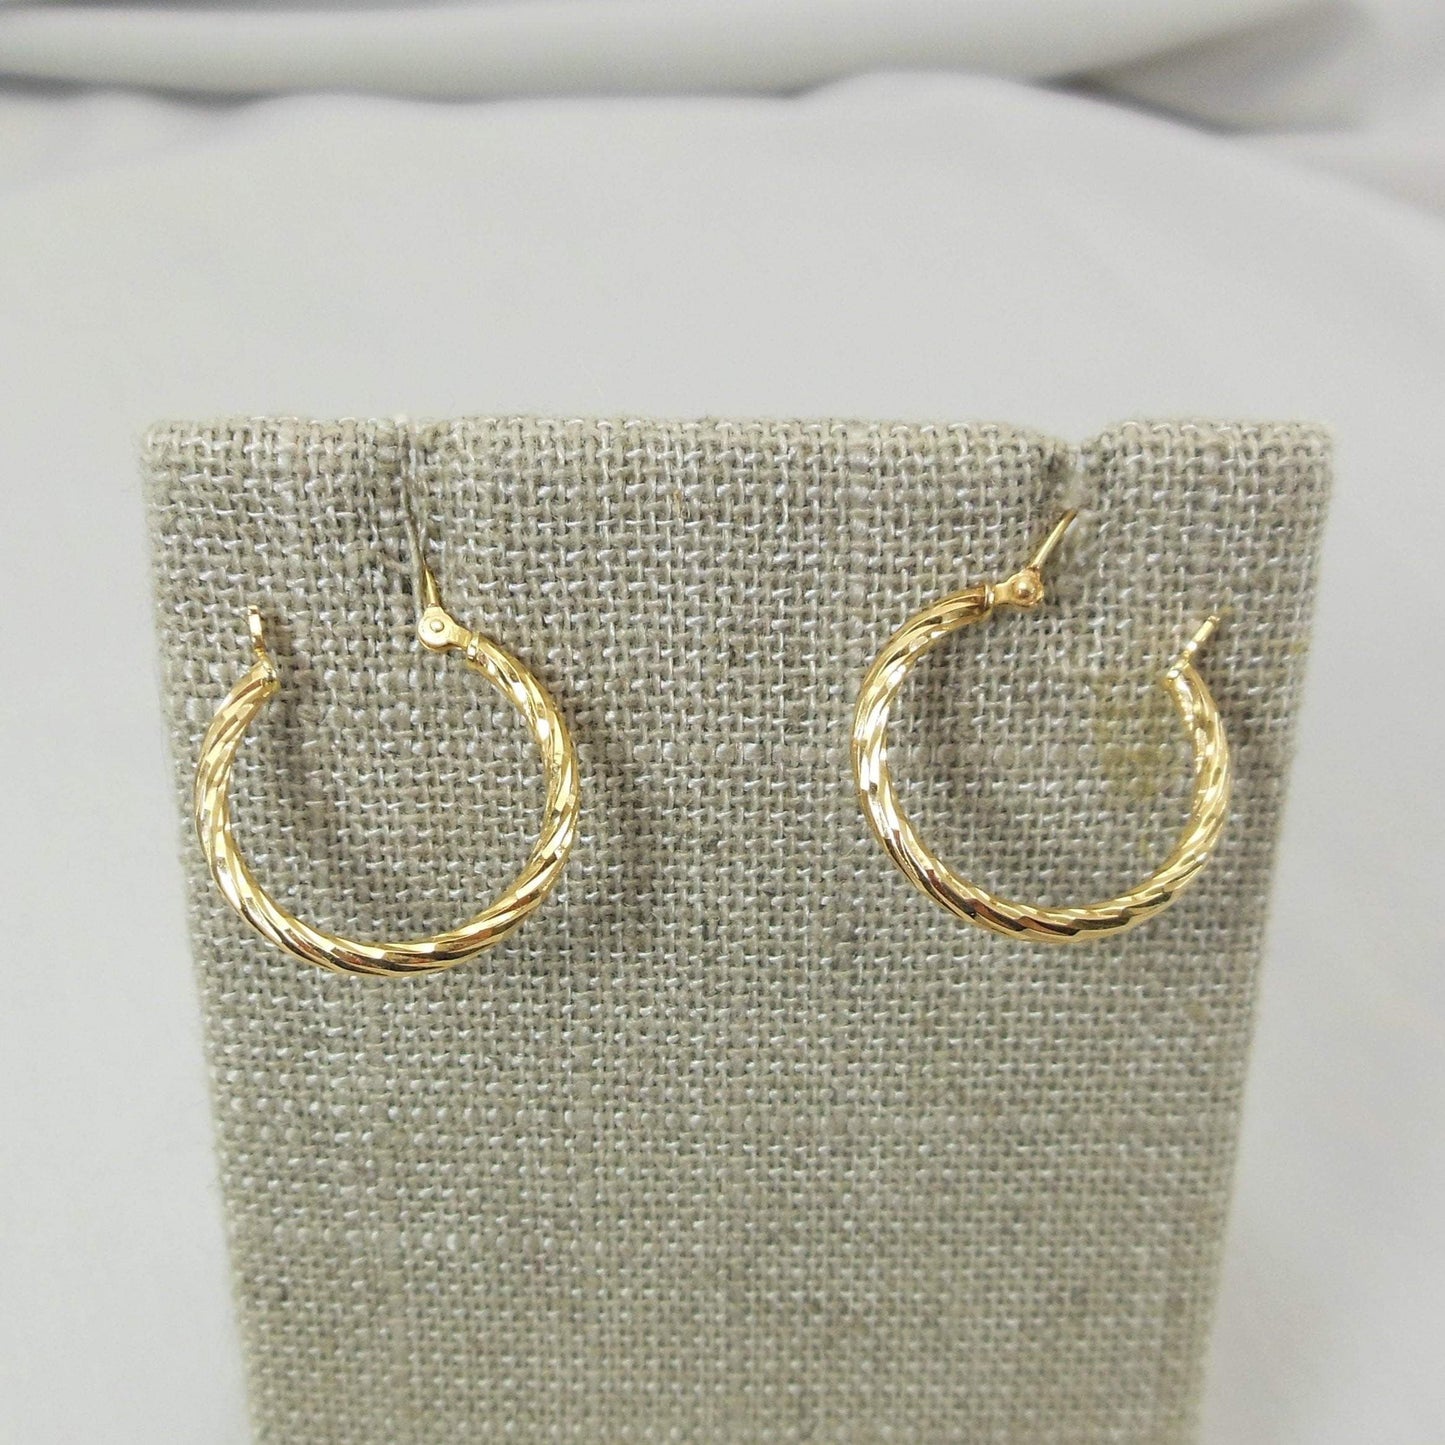 Michael  Anthony NY Pair Estate 14K Yellow Gold Hoop Earrings 20 mm 1 Gram Vontage